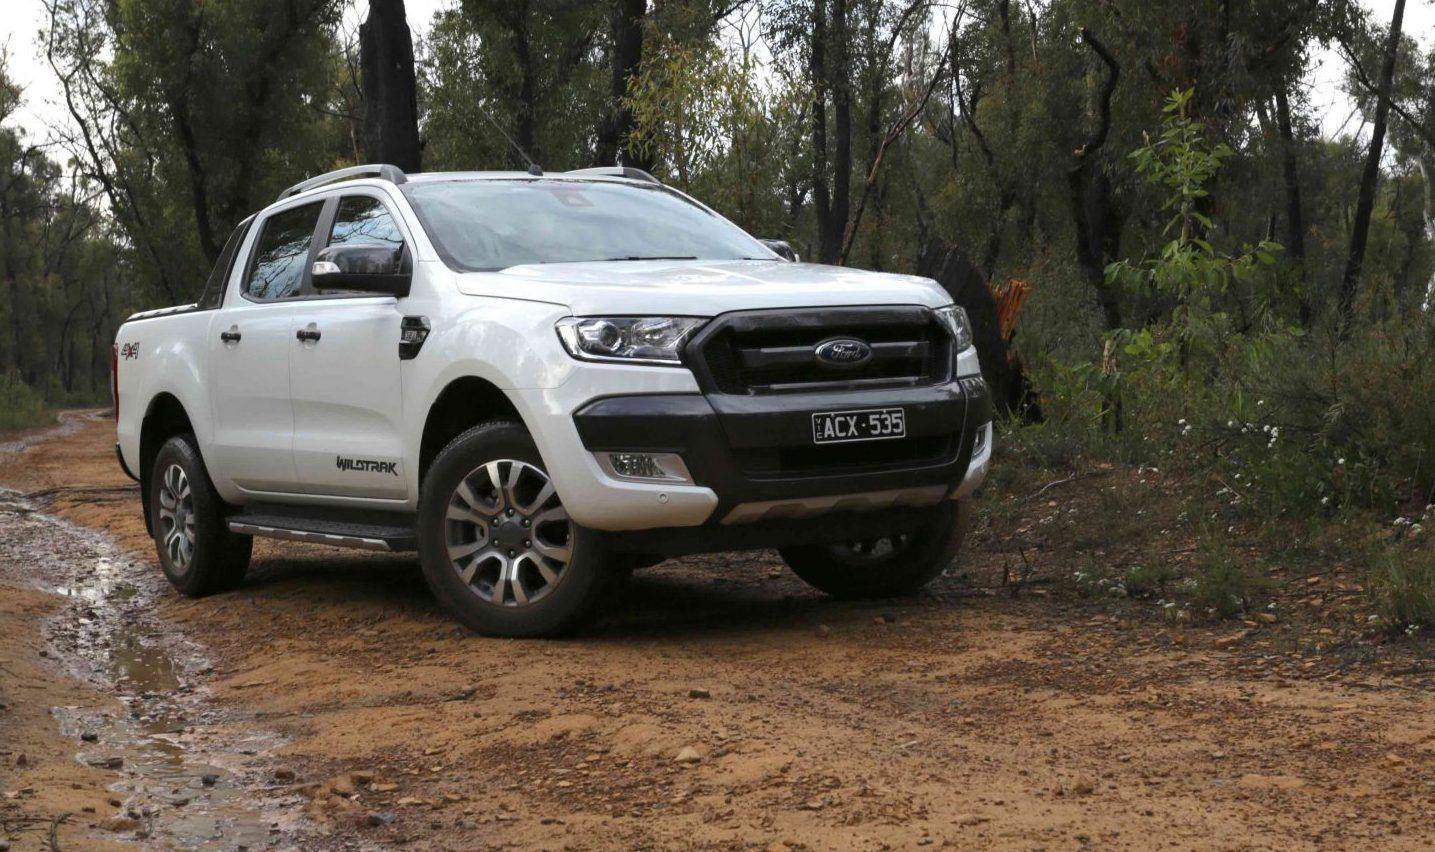 Ford Ranger. Front HD Wallpaper. Car Preview and Rumors